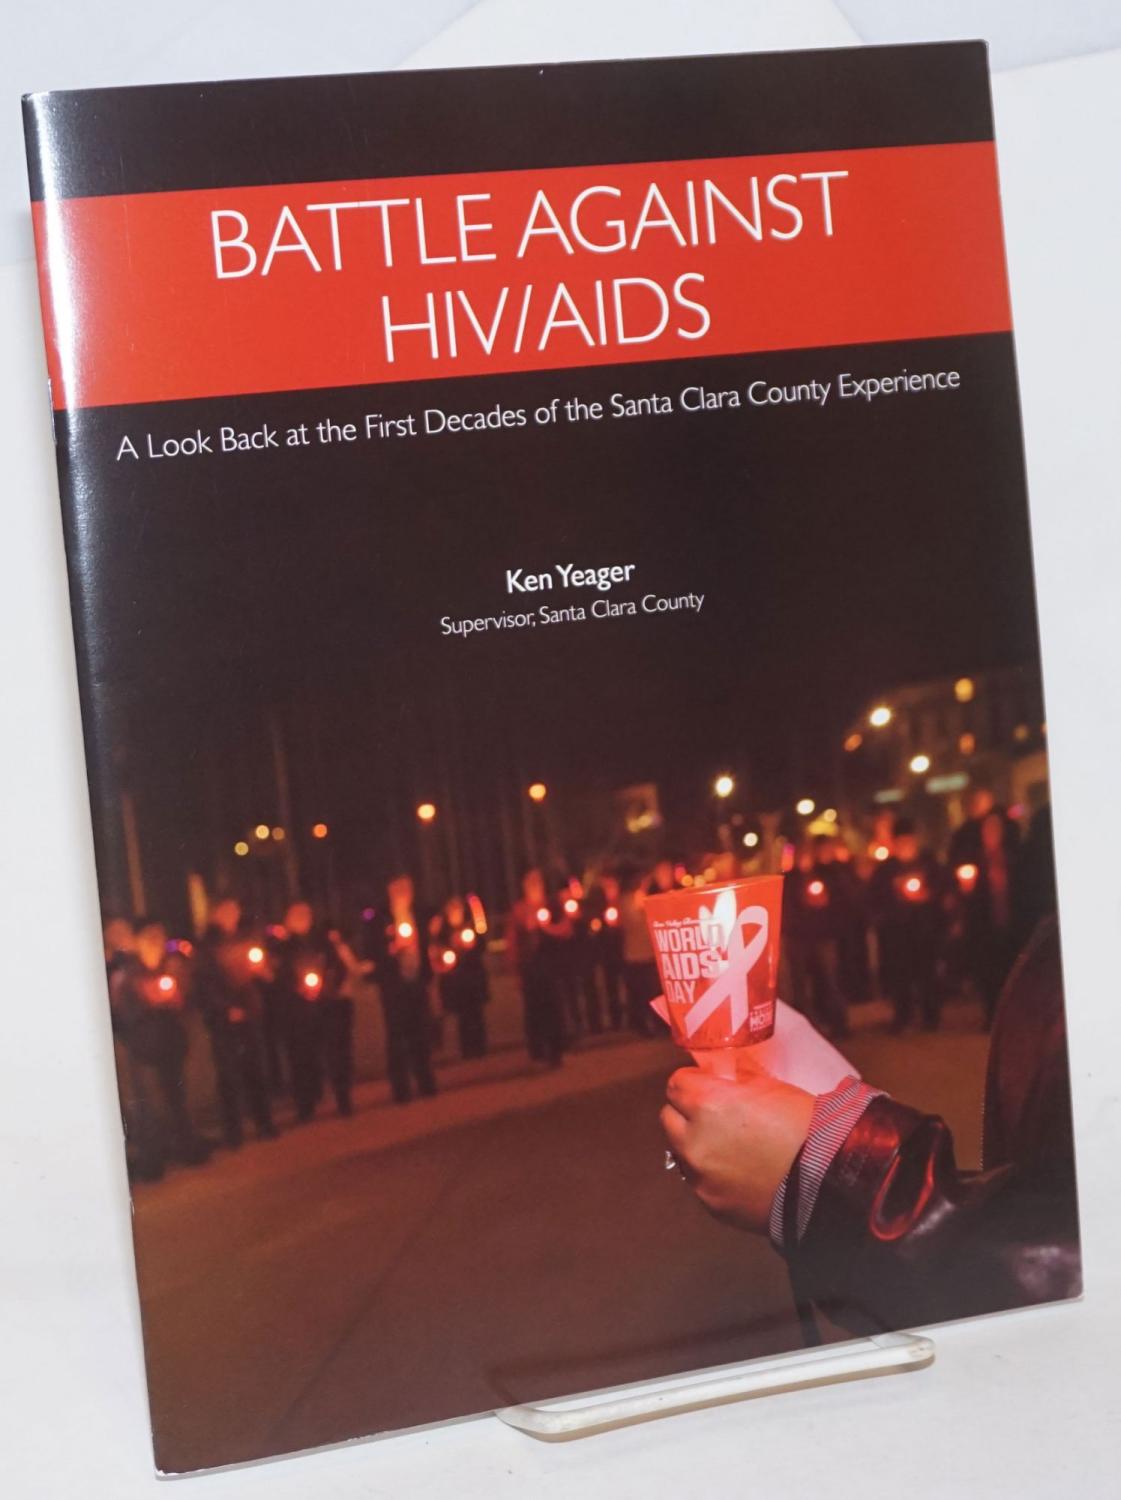 Battle Against HIV/AIDS: a Look Back at the First Decades of the Santa Clara County Experience, book cover